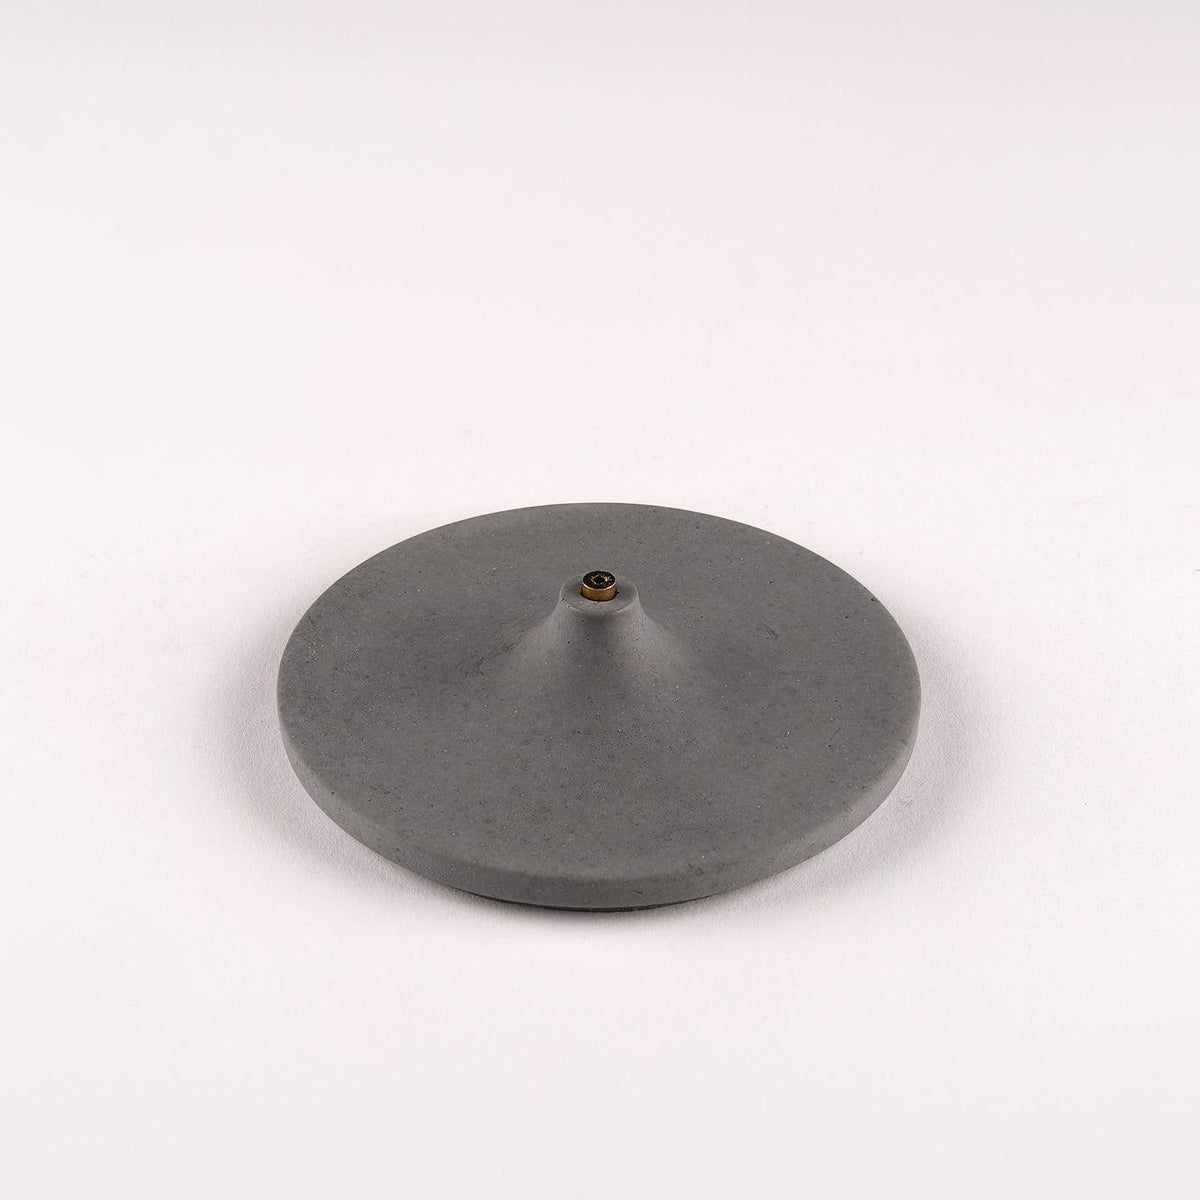 Close up of concrete incense holder Disk by Kin Objects